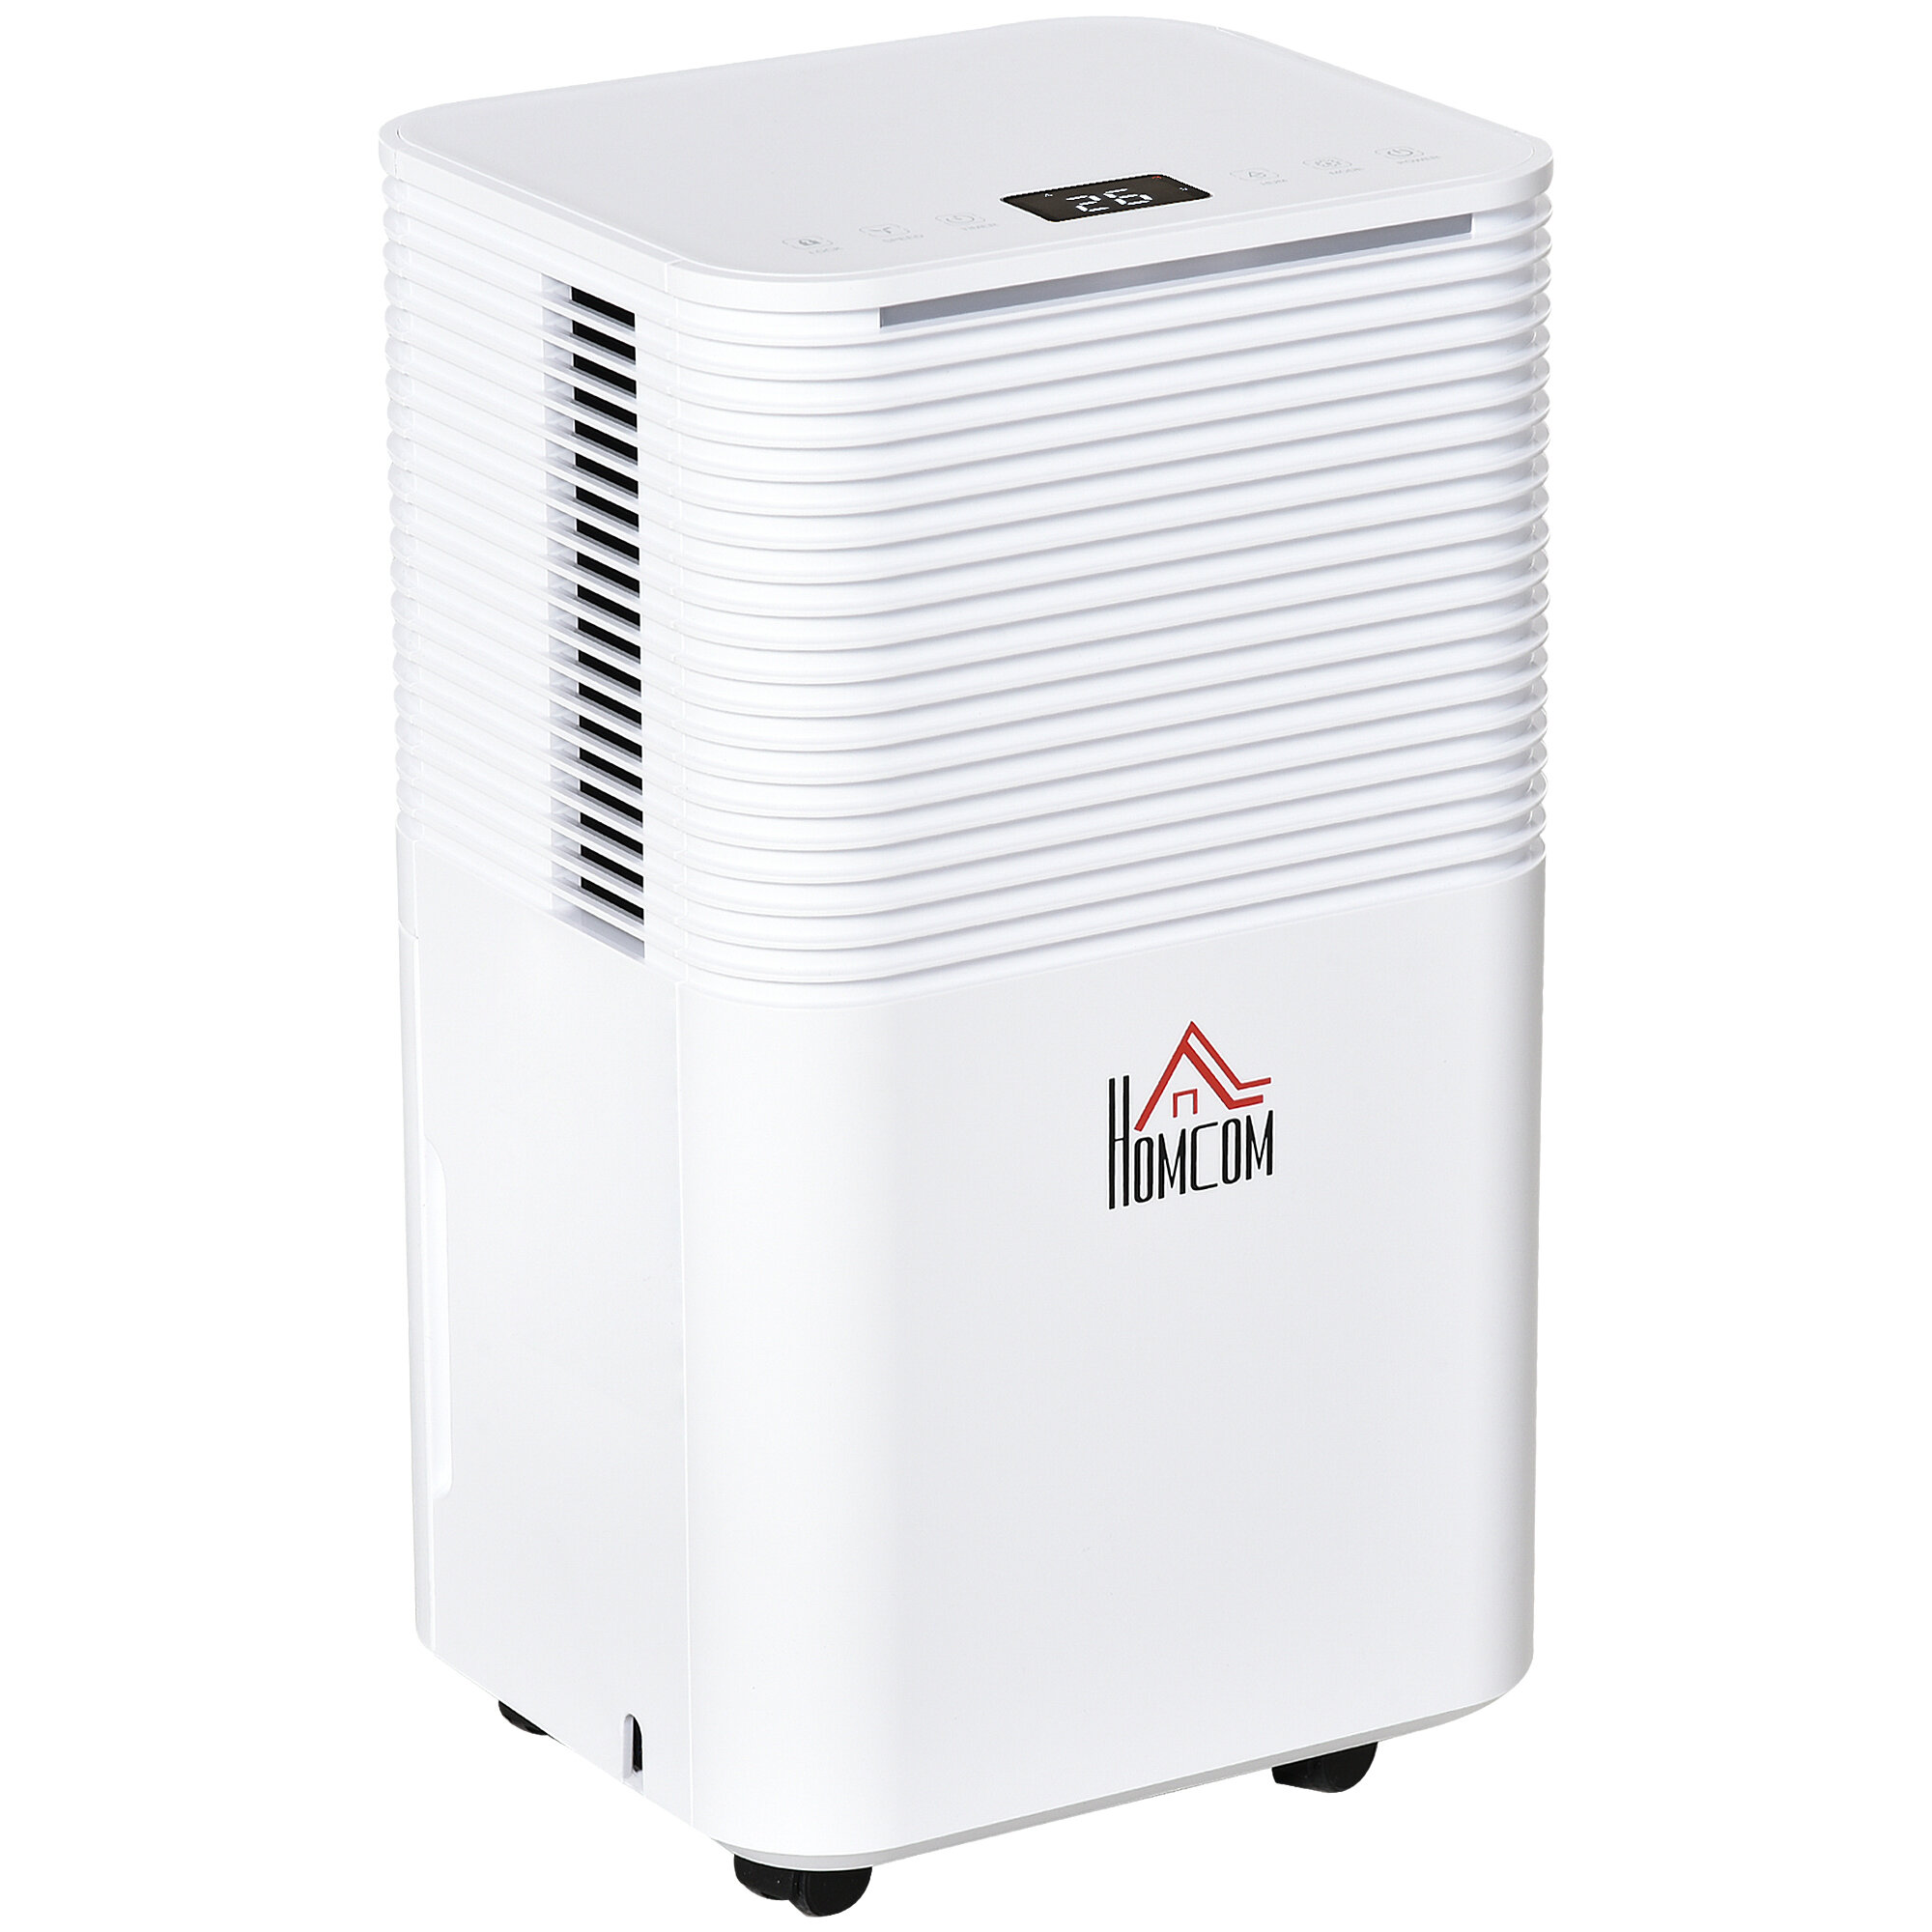 R.W.FLAME 30 Pints per Day Console Dehumidifier for Rooms up to 1500 Sq.  Ft. & Reviews